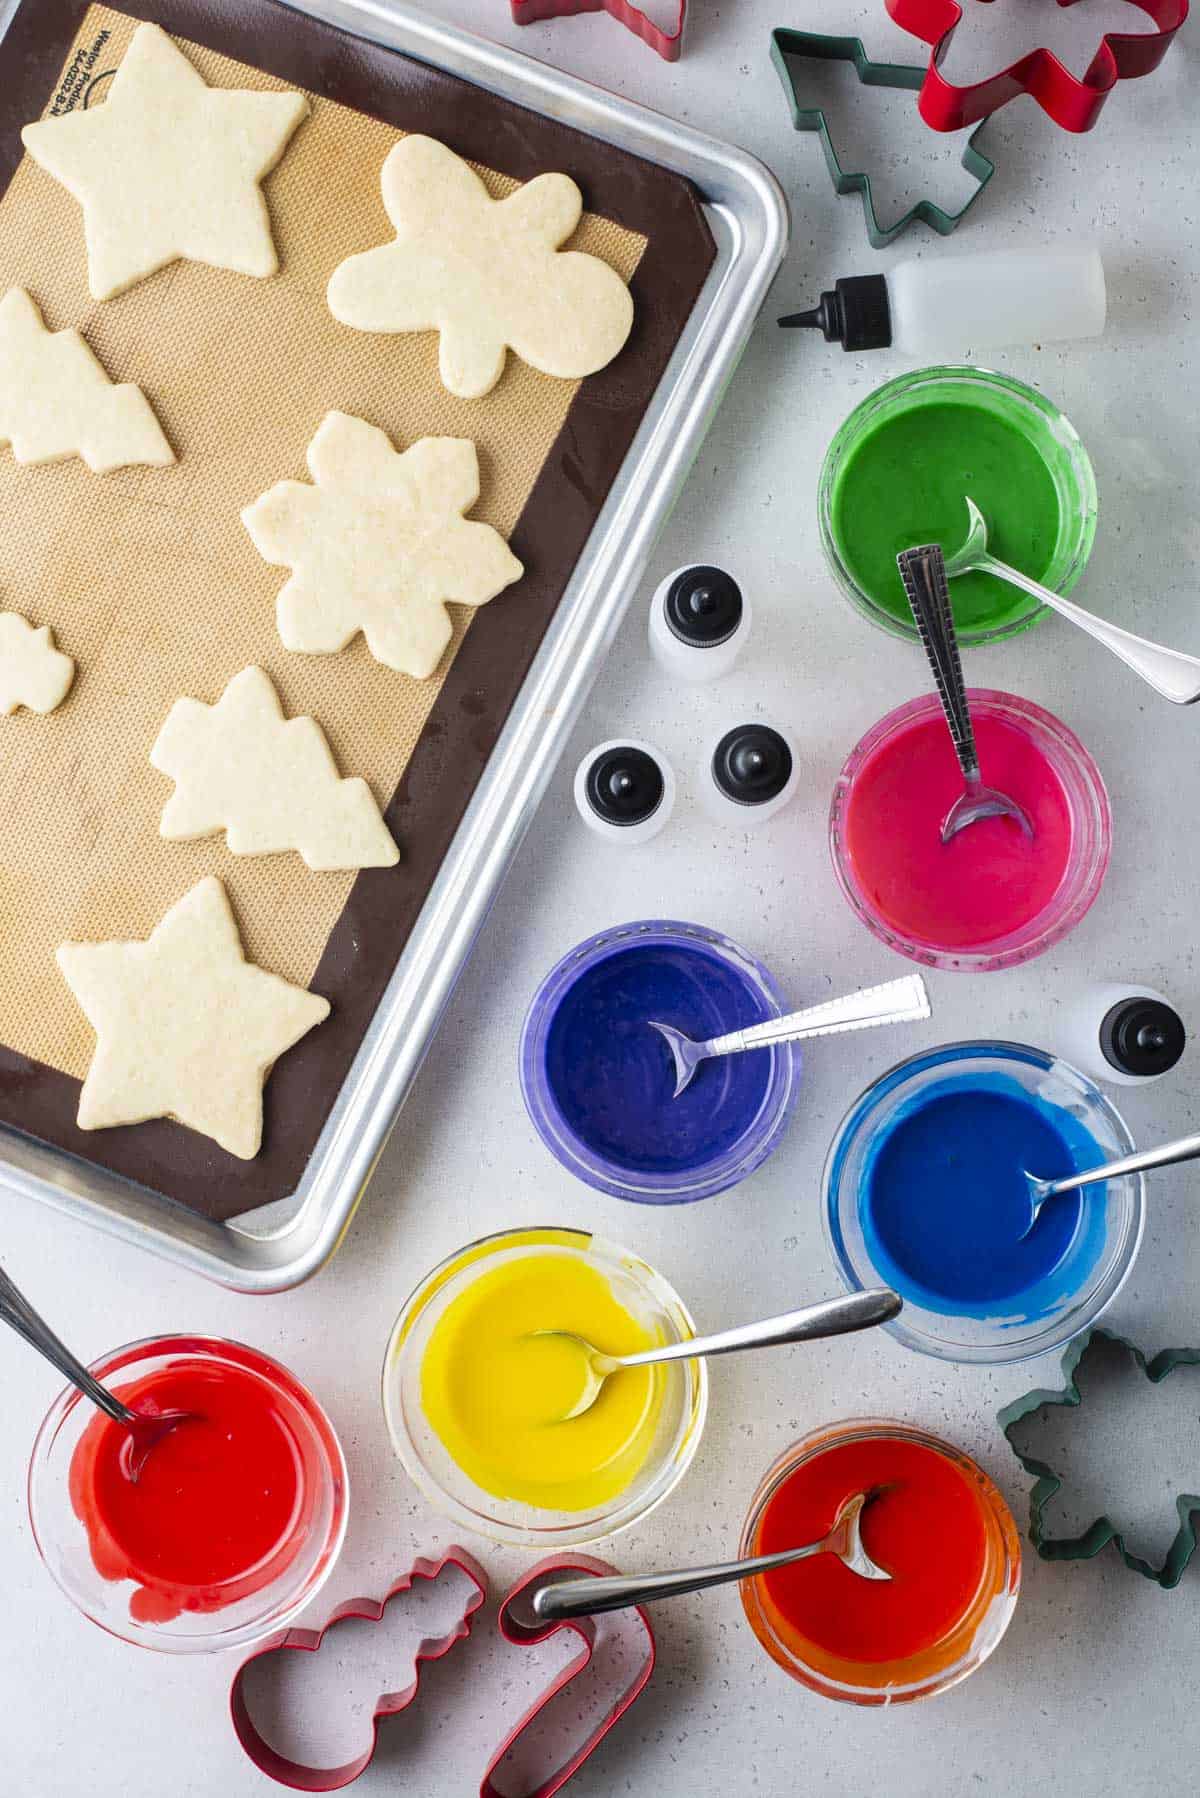 christmas shaped cookies lined in rows on a cookie sheet with bowls of colored icing with spoons beside it, empty squeeze bottles and cookie cutters